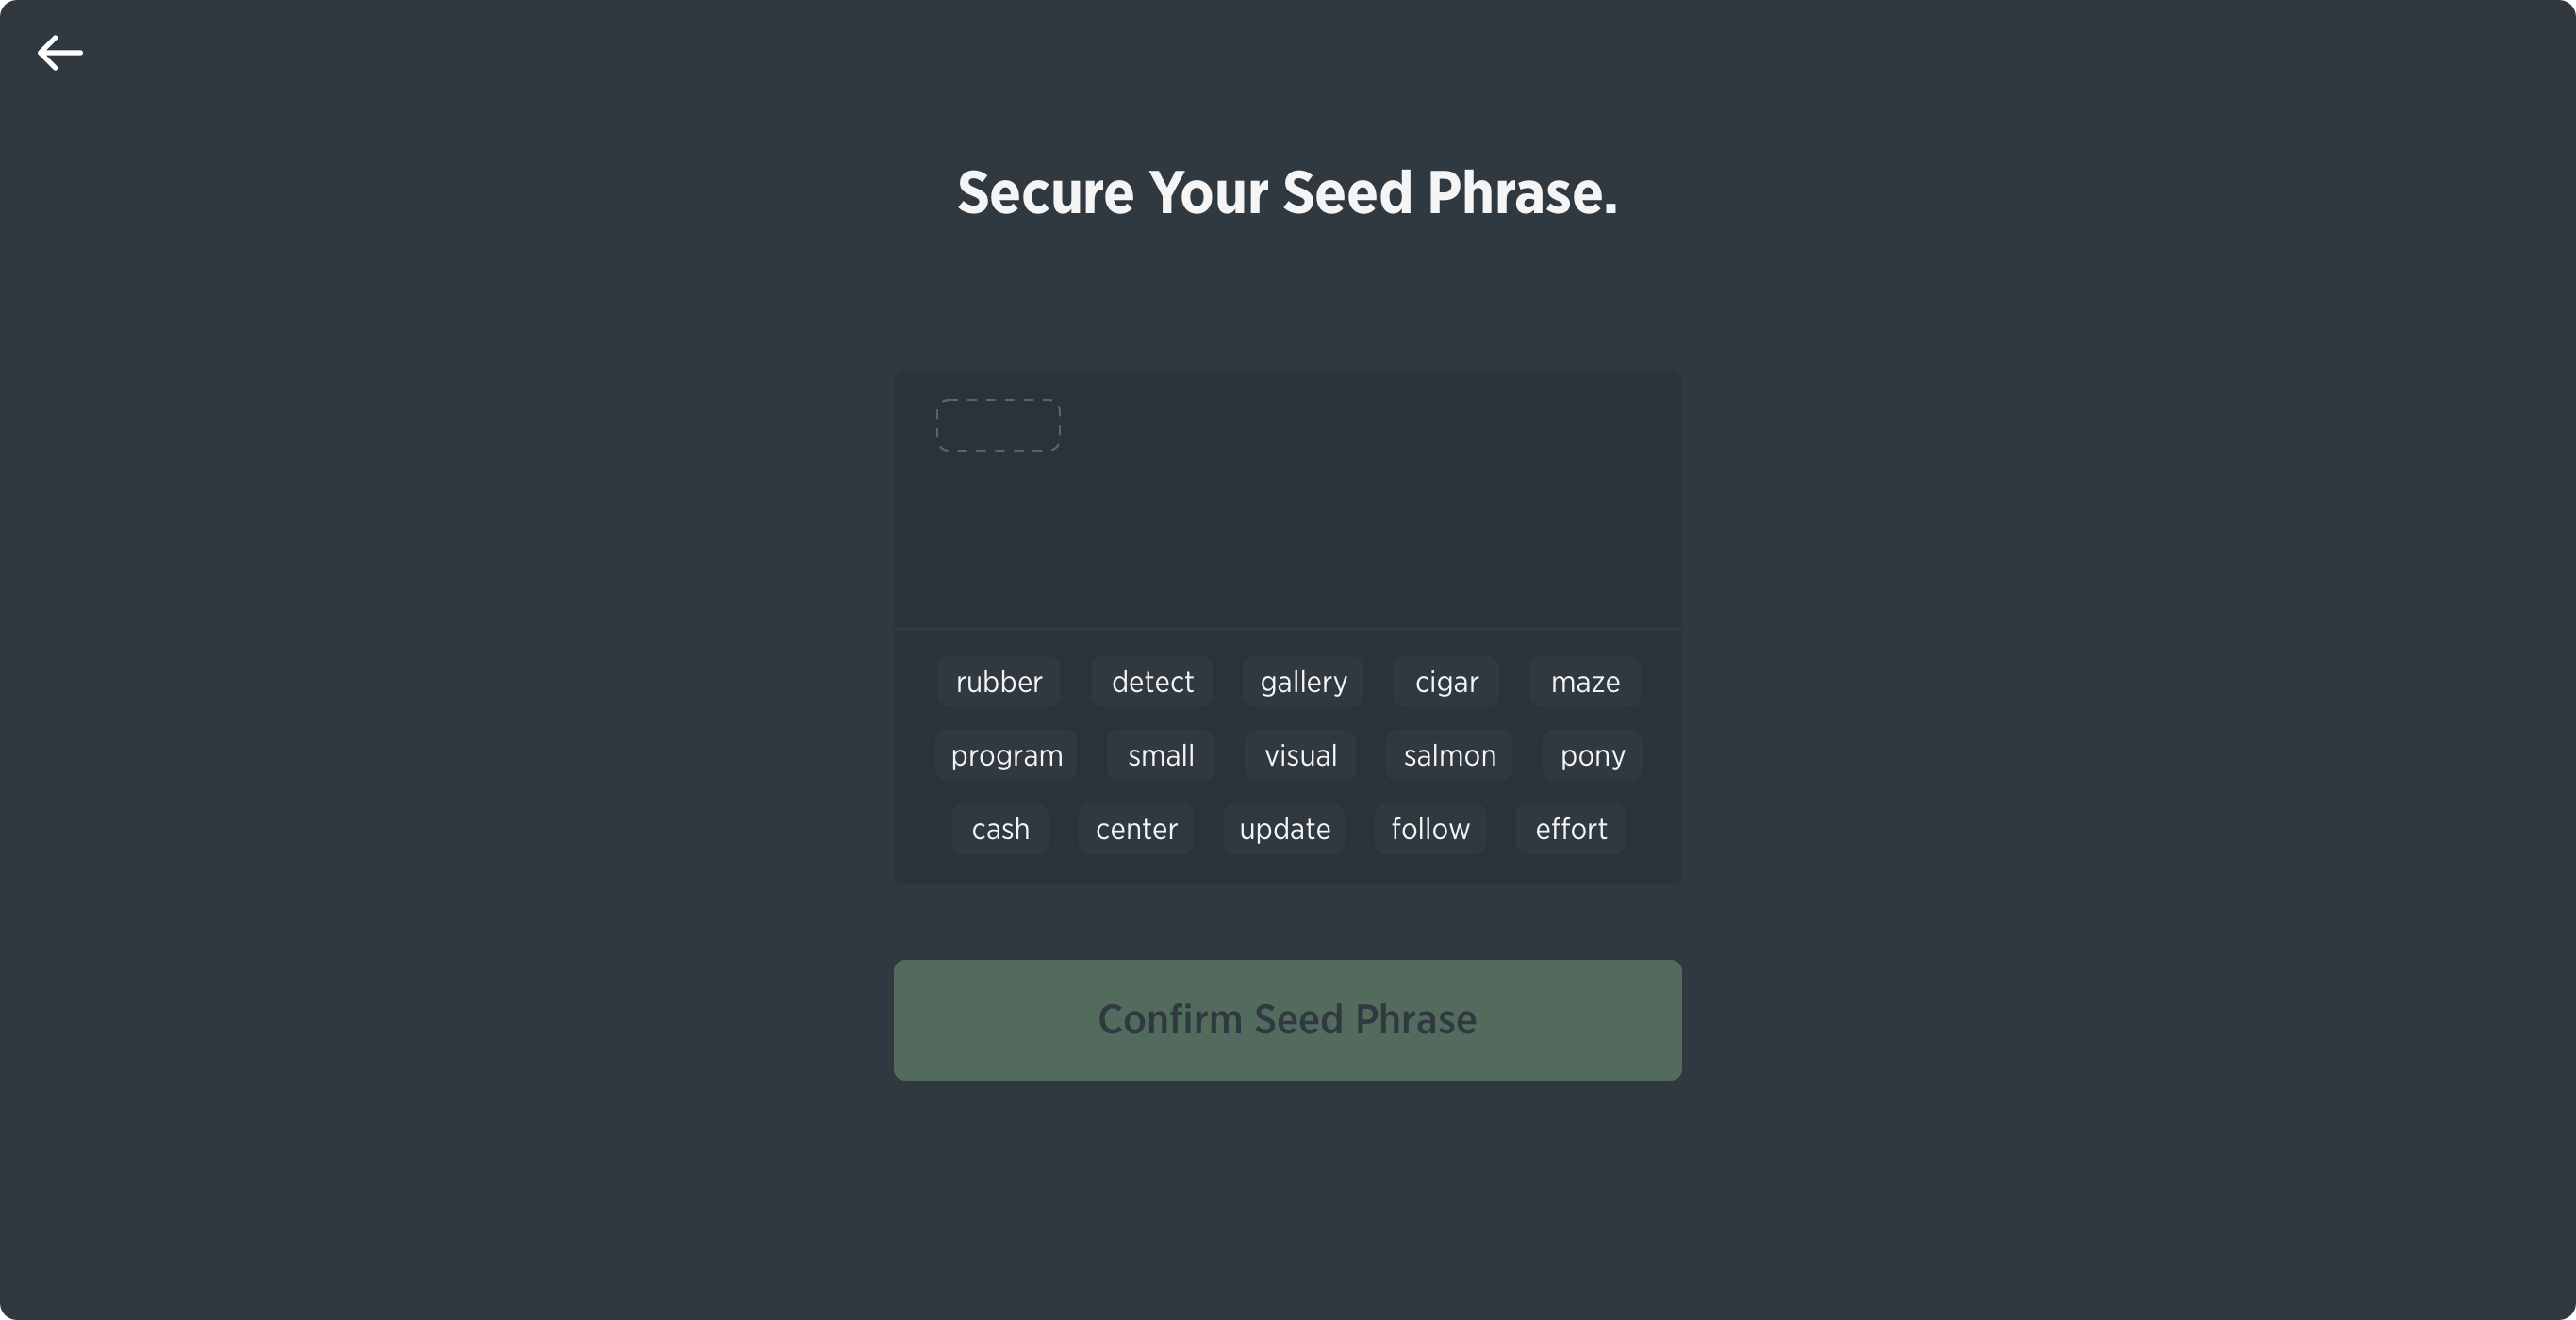 Seed phrase for registration: A typical form of blockchain user credentials